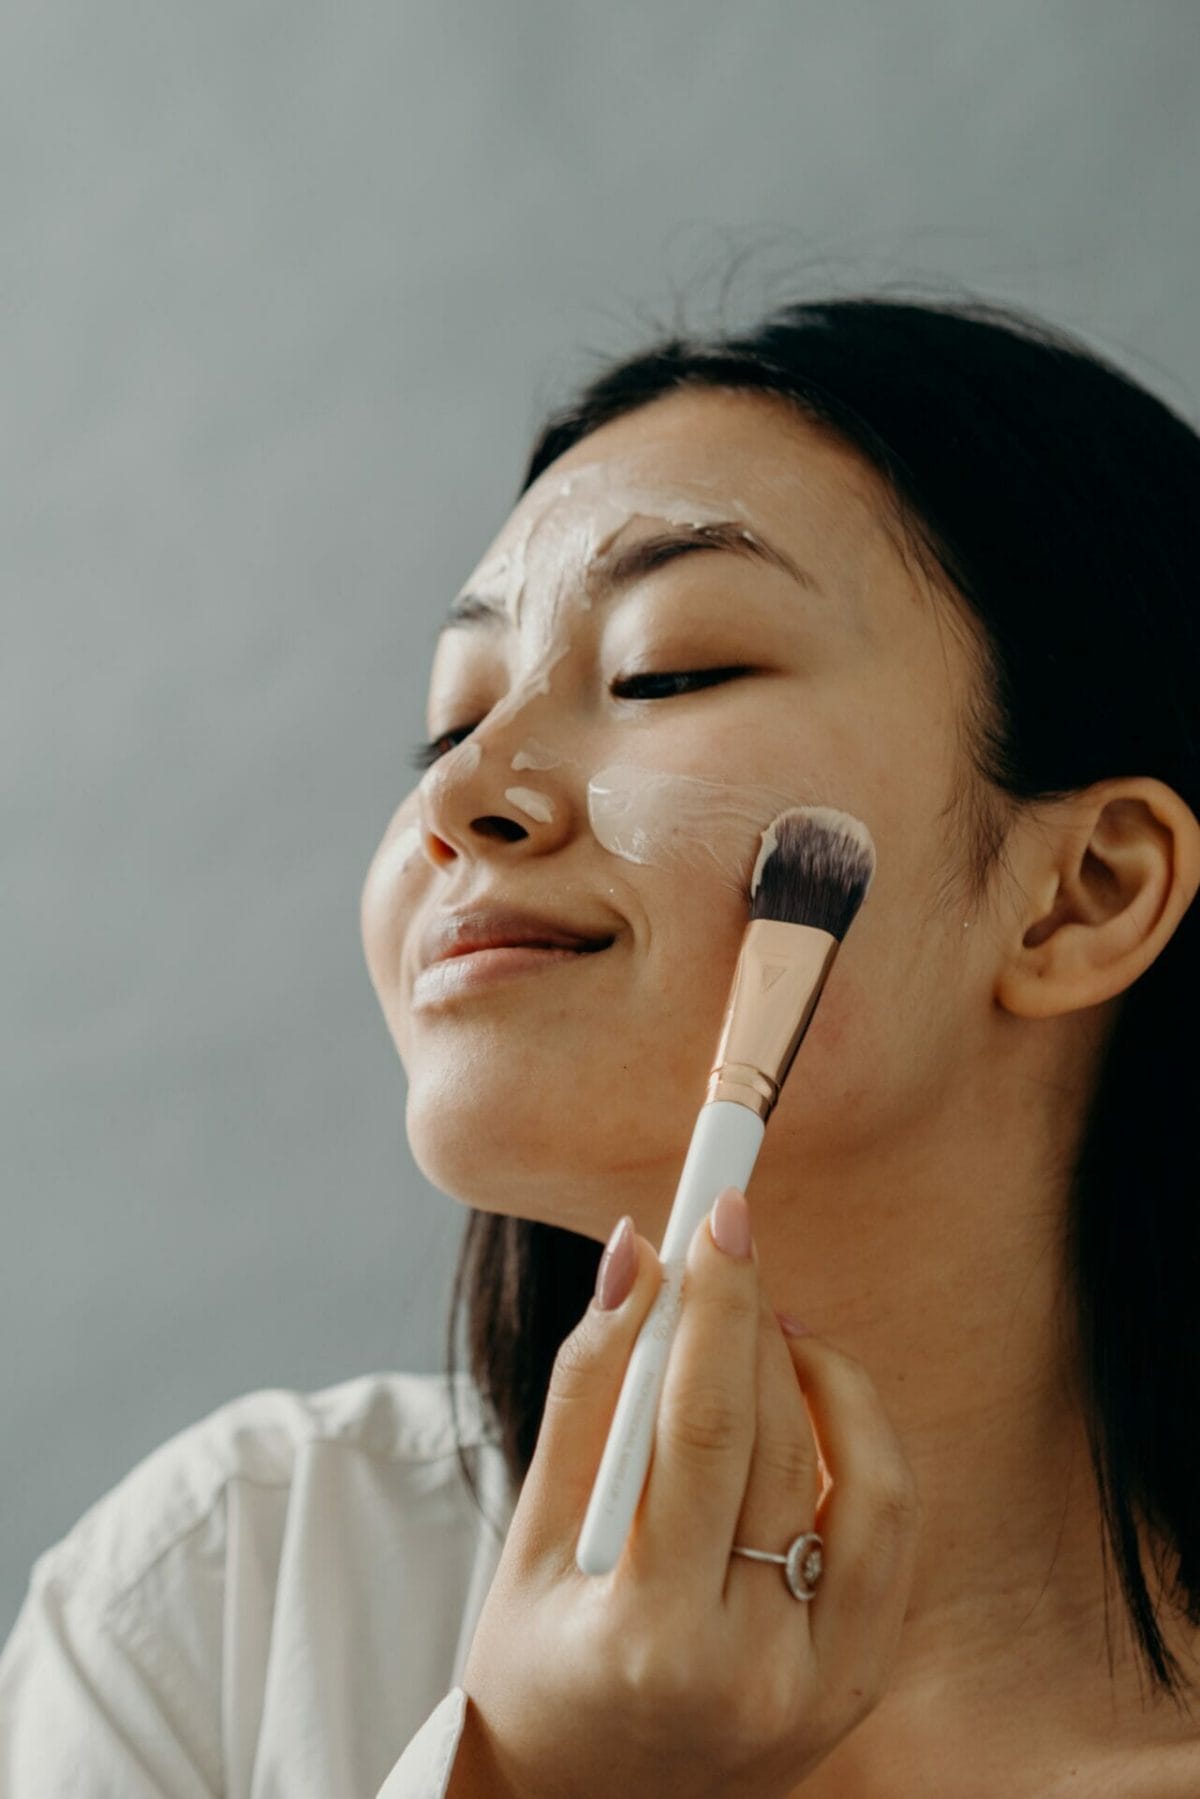 A woman using a brush to properly exfoliate her skin while applying makeup.